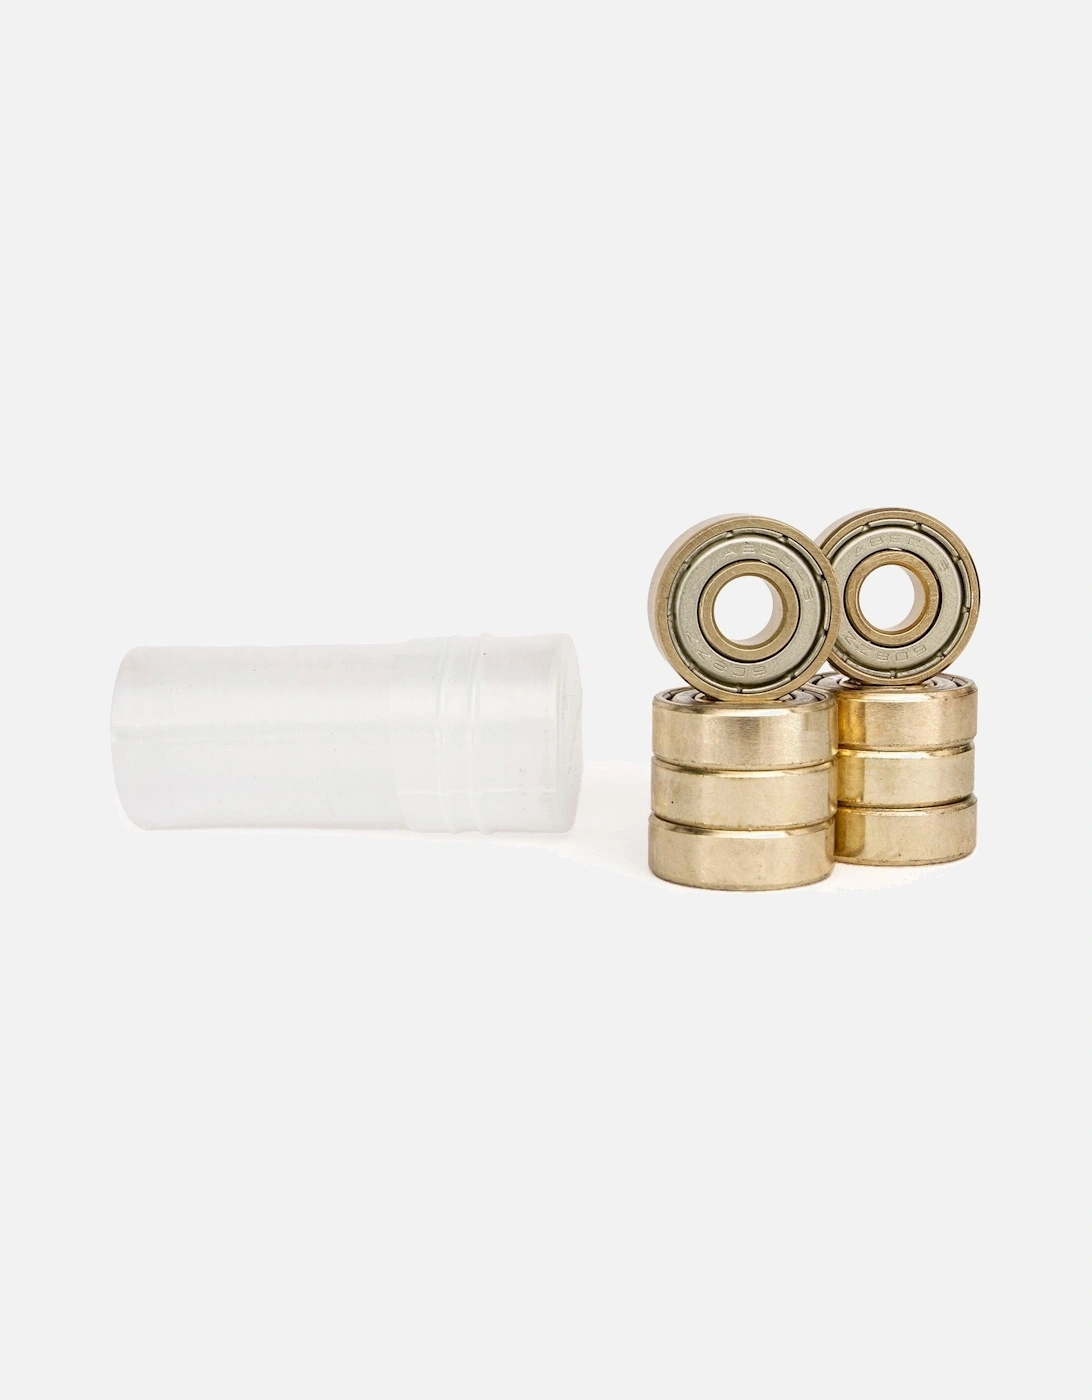 Abec 5 Chrome Goldies Bearings - 8 Pack, 2 of 1